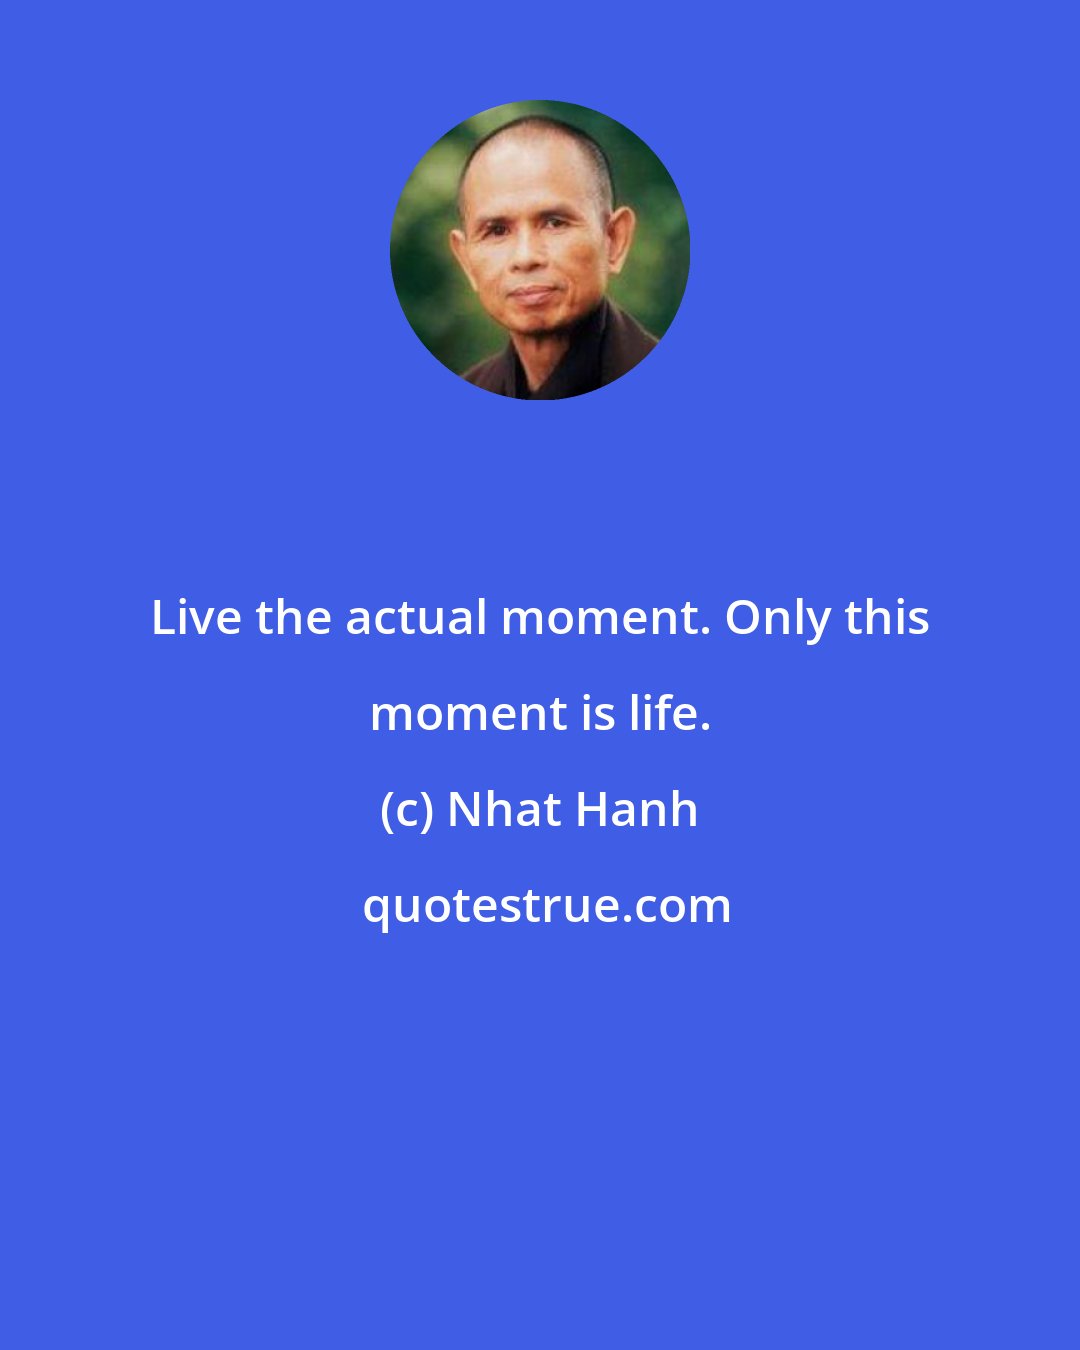 Nhat Hanh: Live the actual moment. Only this moment is life.